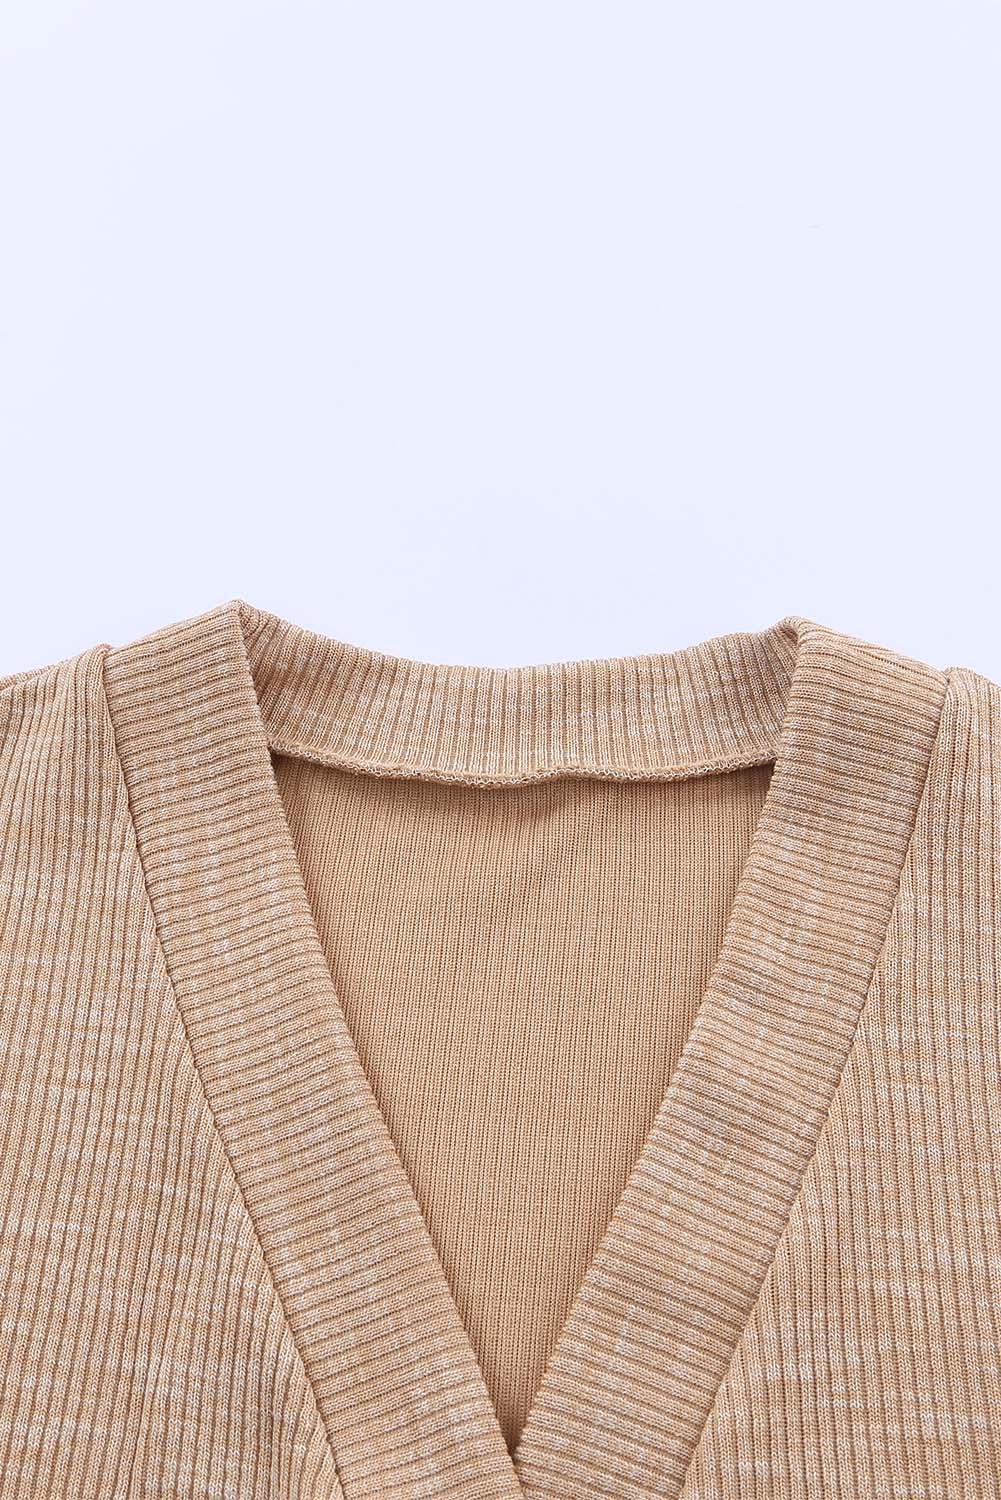 Ribbed Buttons V Neck Cardigan